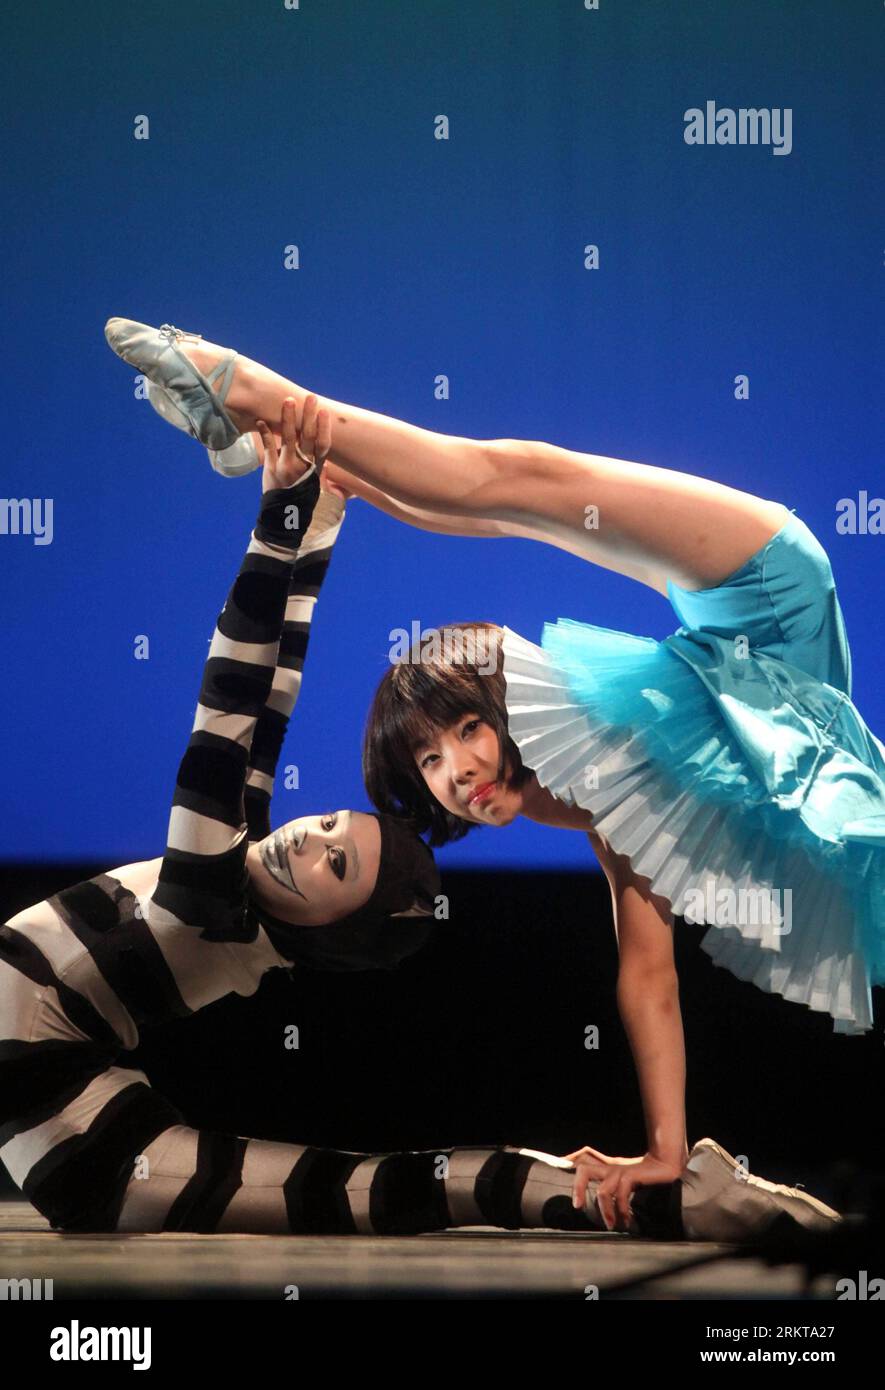 Bildnummer: 58417425  Datum: 01.09.2012  Copyright: imago/Xinhua TIANJIN, Sept. 1, 2012 - Acrobats perform in the premiere of the acrobatics show Alice s Adventures in Wonderland in north China s Tianjin, Sept. 1, 2012. The acrobatics show, co-created by Chinese and French artists, is adapted from the novel written by English author Charles Dodgson which tells a story of a girl named Alice who falls down a rabbit hole into a fantasy world populated by peculiar creatures. (Xinhua/Liu Dongyue) (mp) CHINA-TIANJIN-ACROBATICS-PREMIERE (CN) PUBLICATIONxNOTxINxCHN Gesellschaft Kultur Akrobatik Akroba Stock Photo